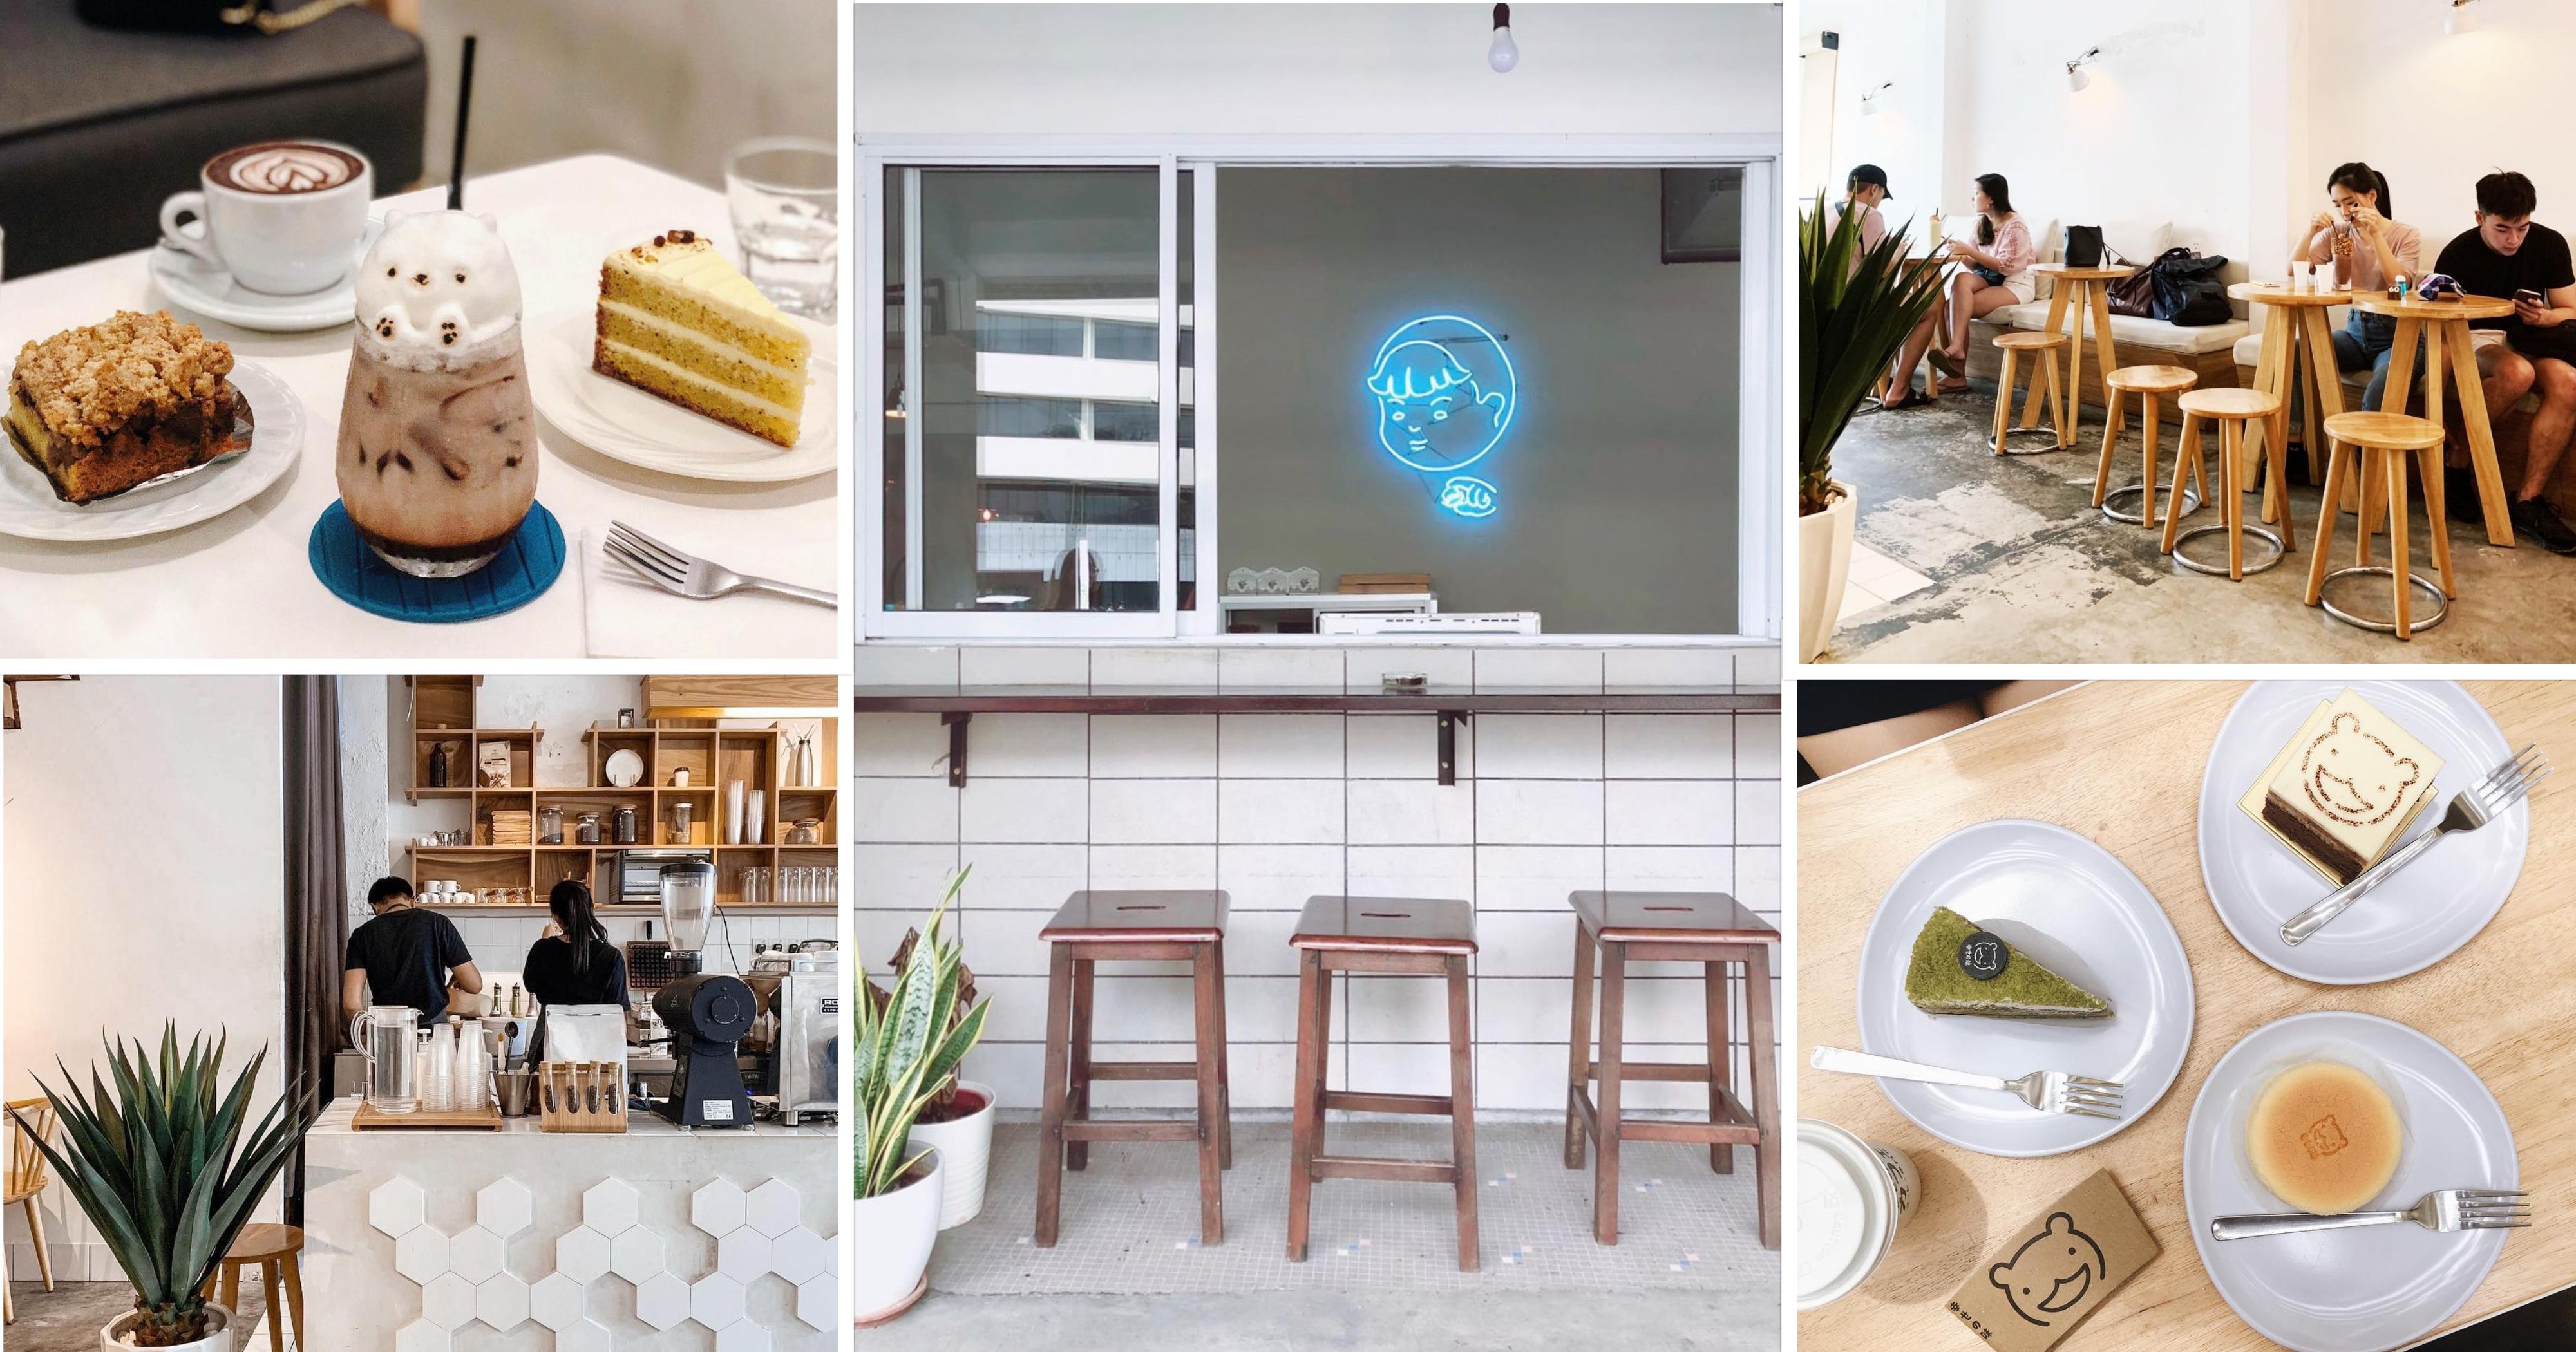 5 ~aesthetic~ cafes in JB less with wood-accented interiors, 10 minutes